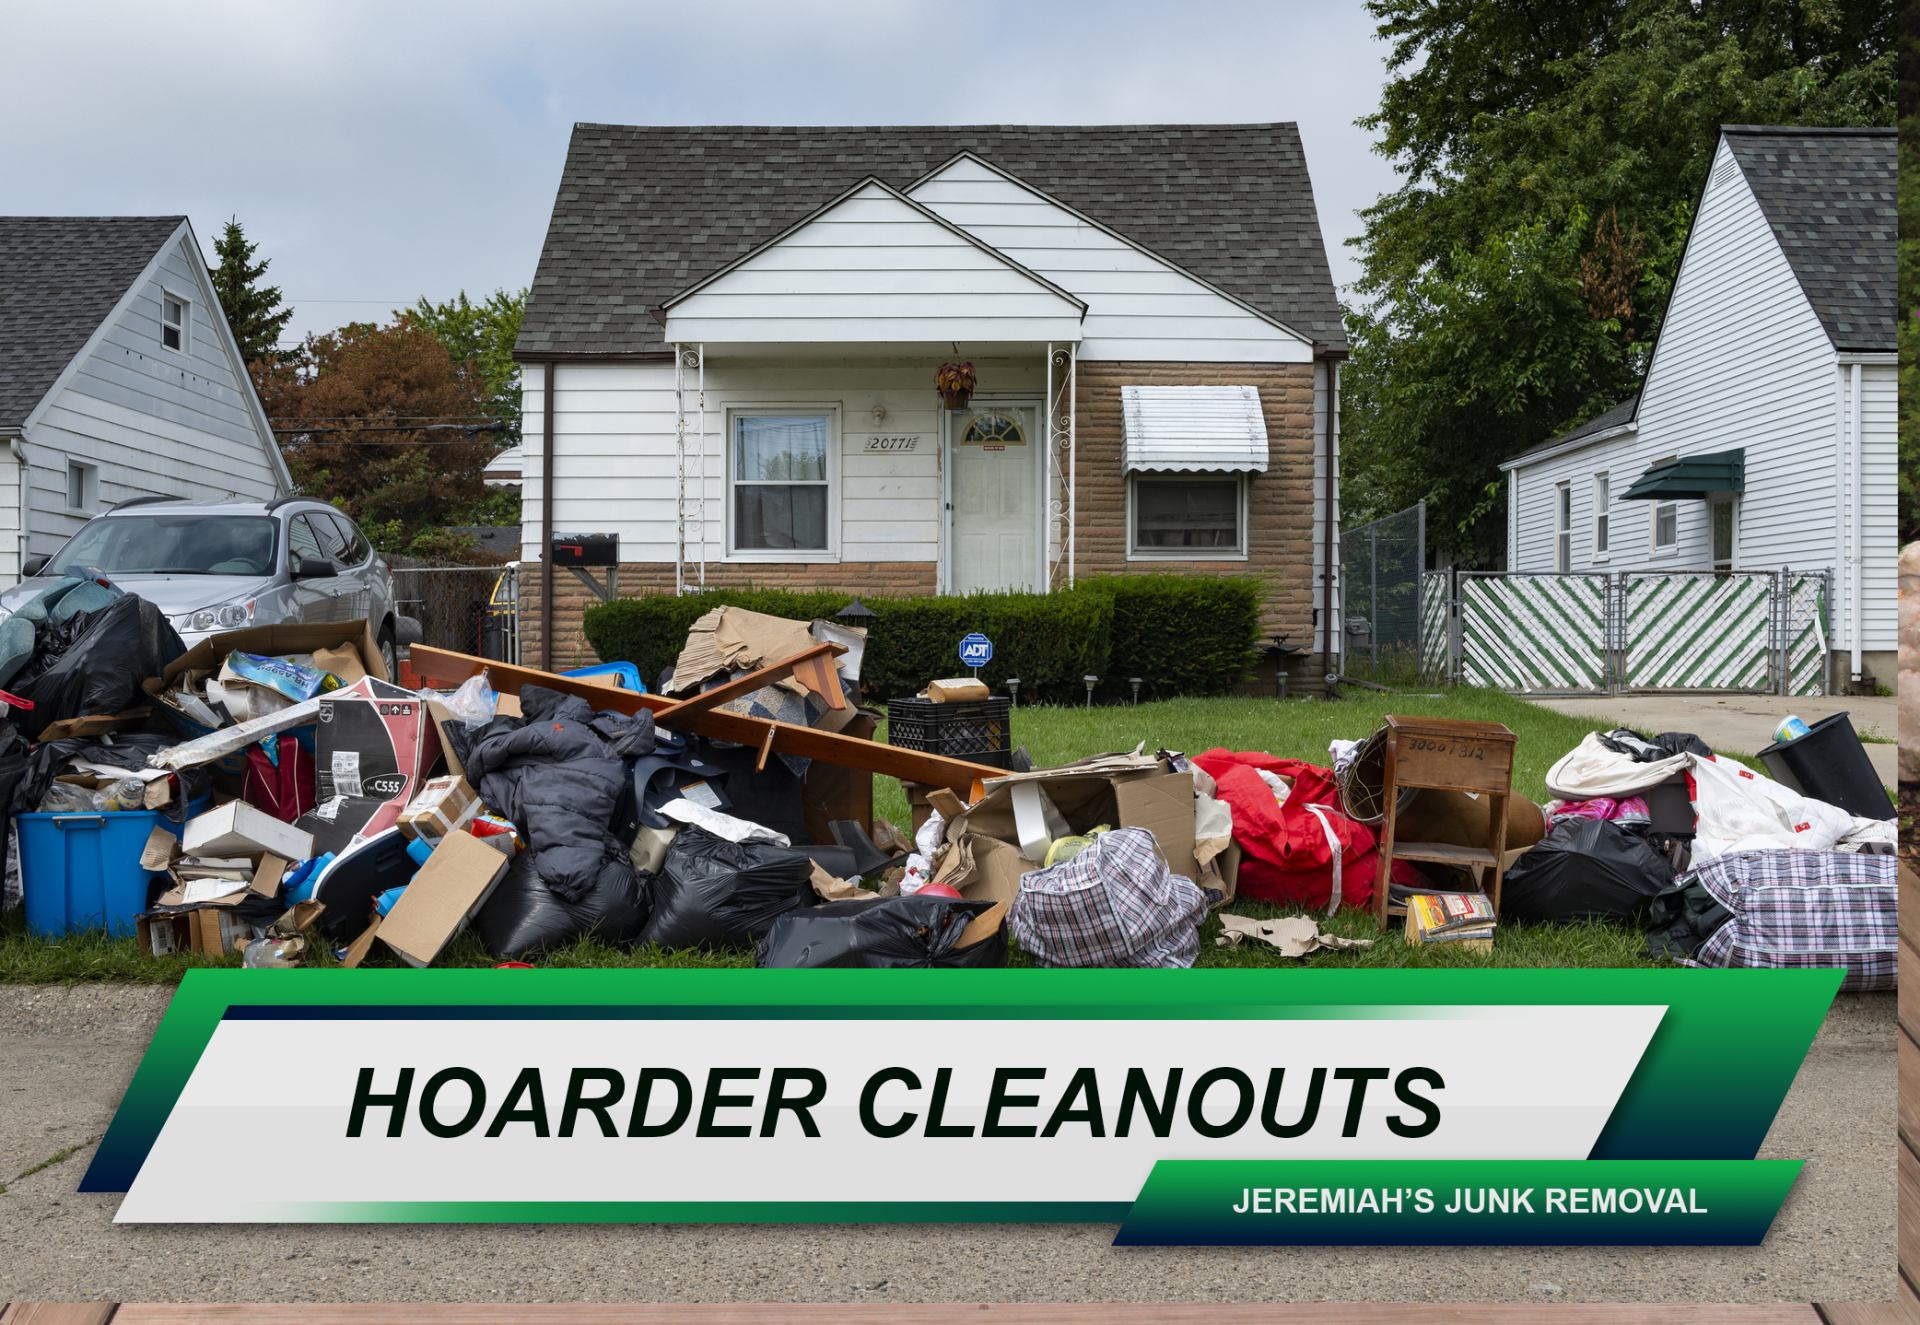 Hoarder cleanouts